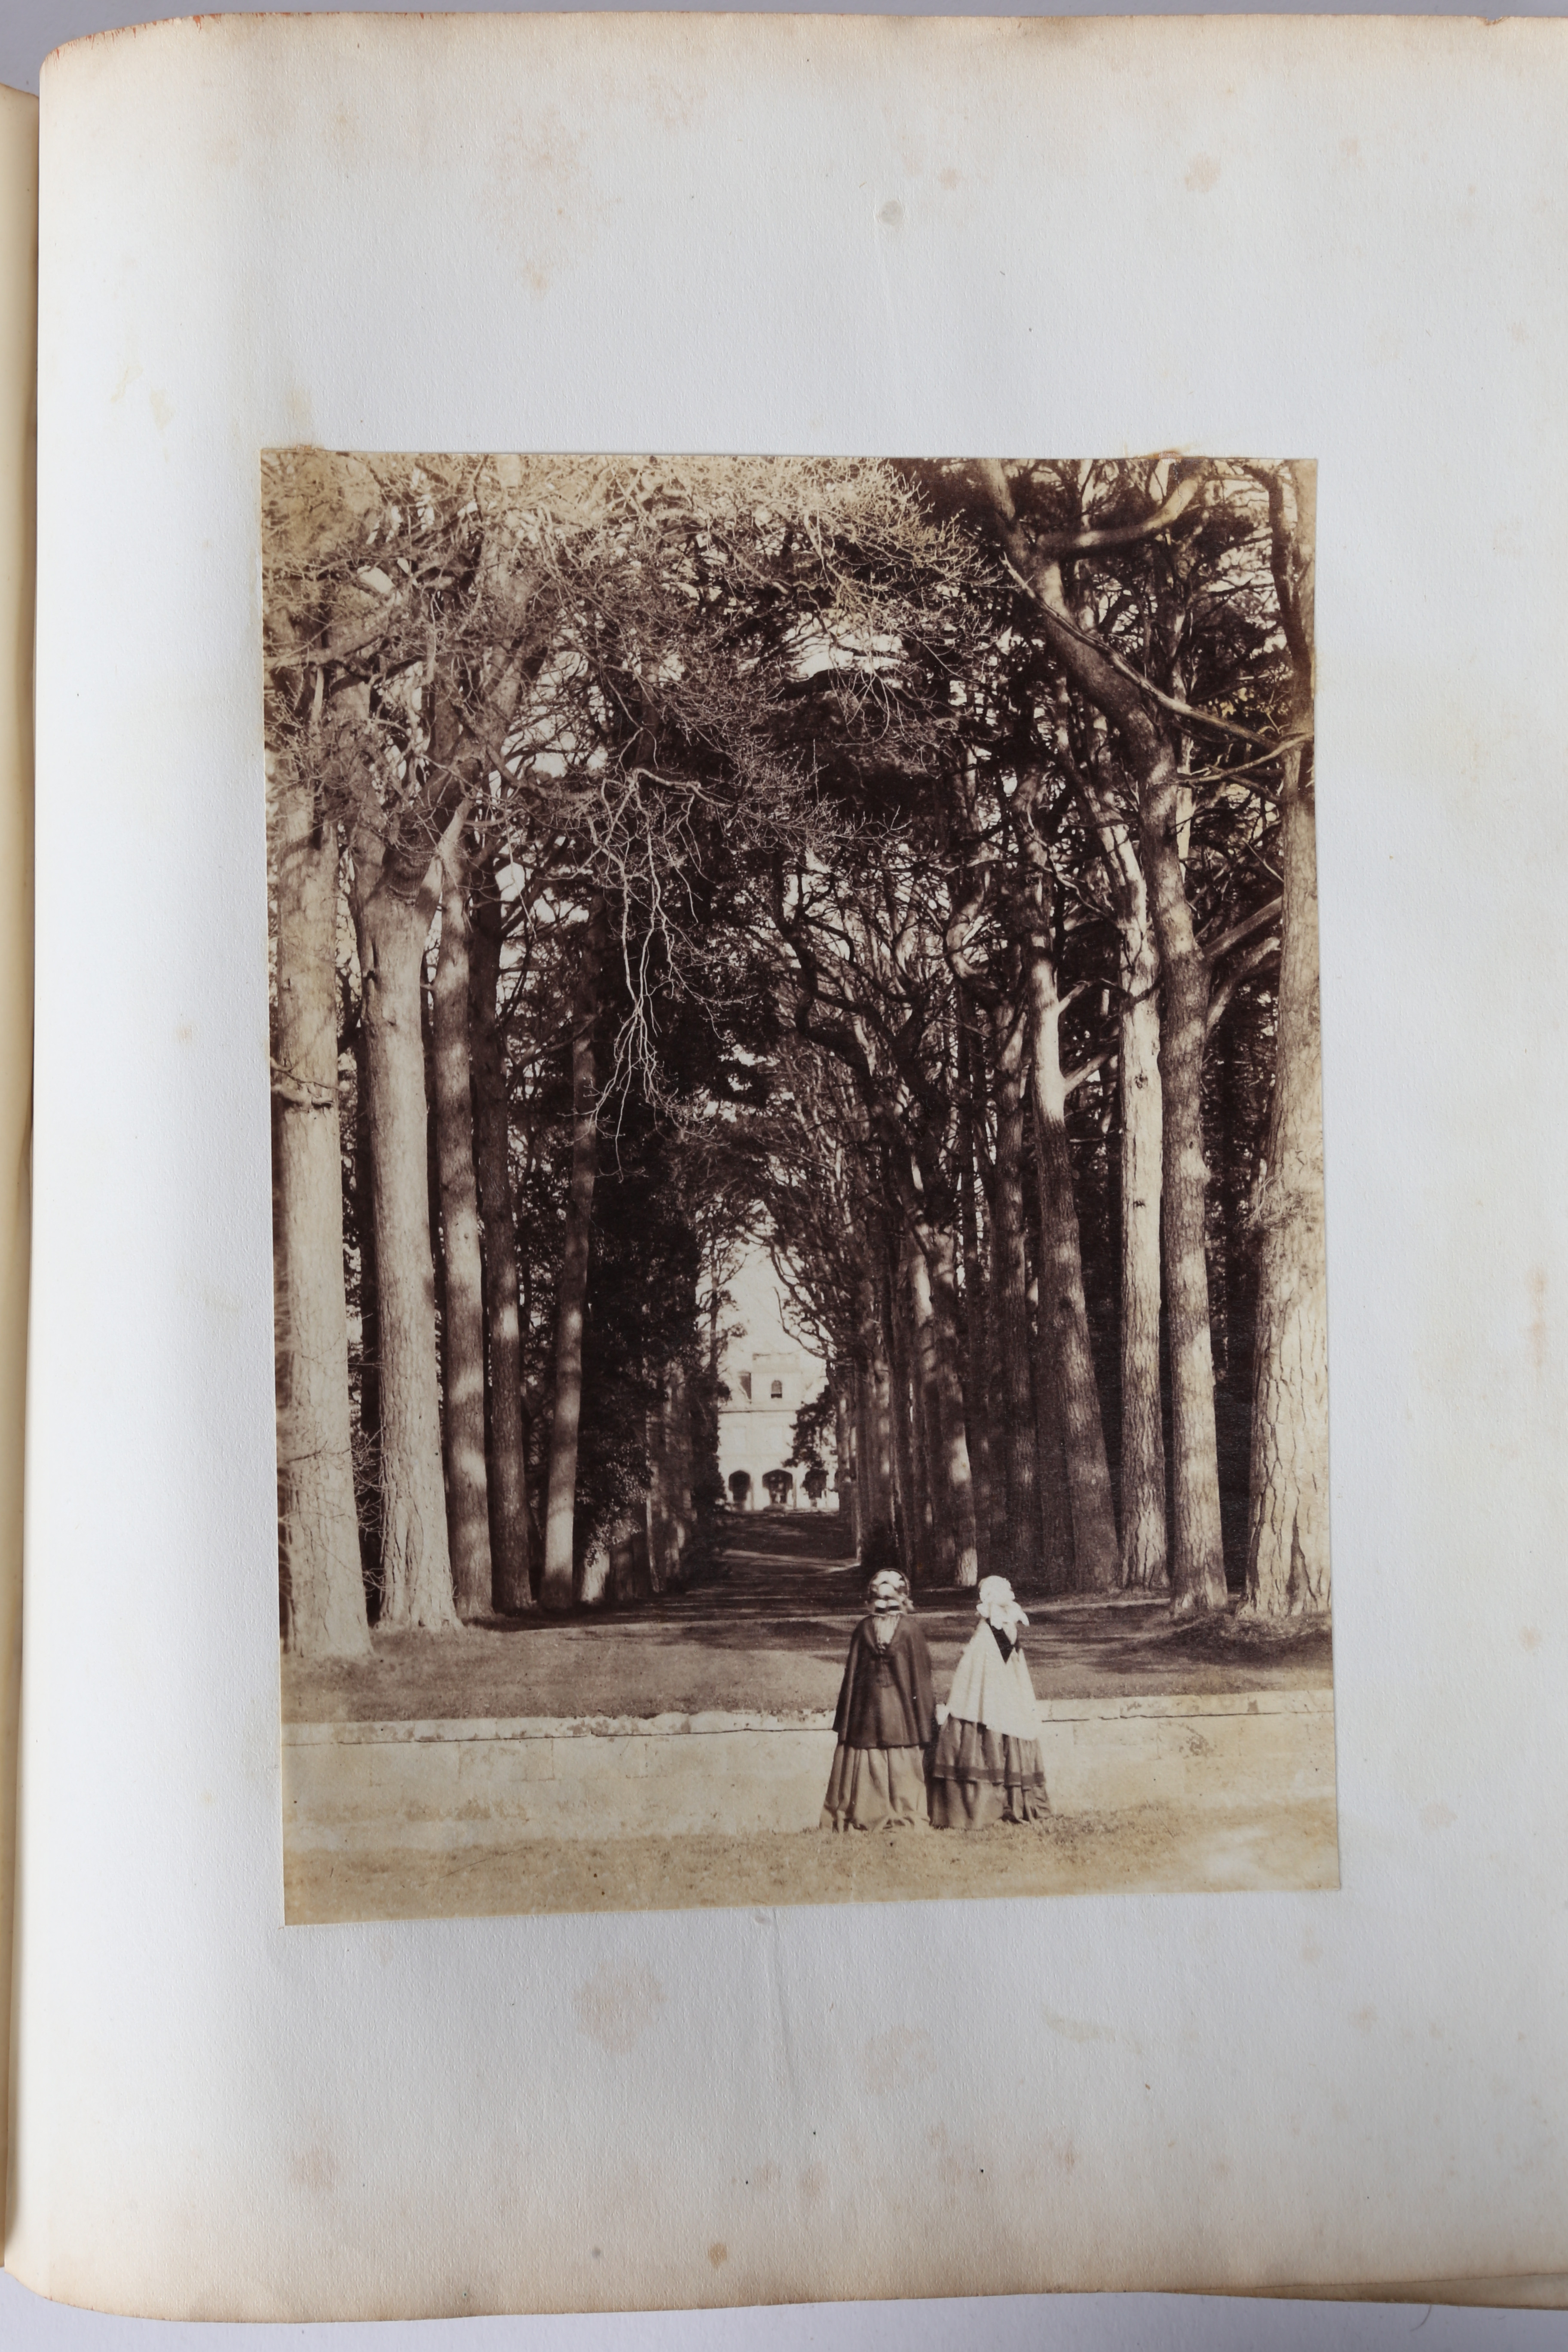 VICTORIAN PHOTOGRAPH ALBUM BELONGING TO GENERAL SIR HARRY JONES GCB DCL, AND HIS WIFE LADY CHARLOTTE - Image 30 of 60